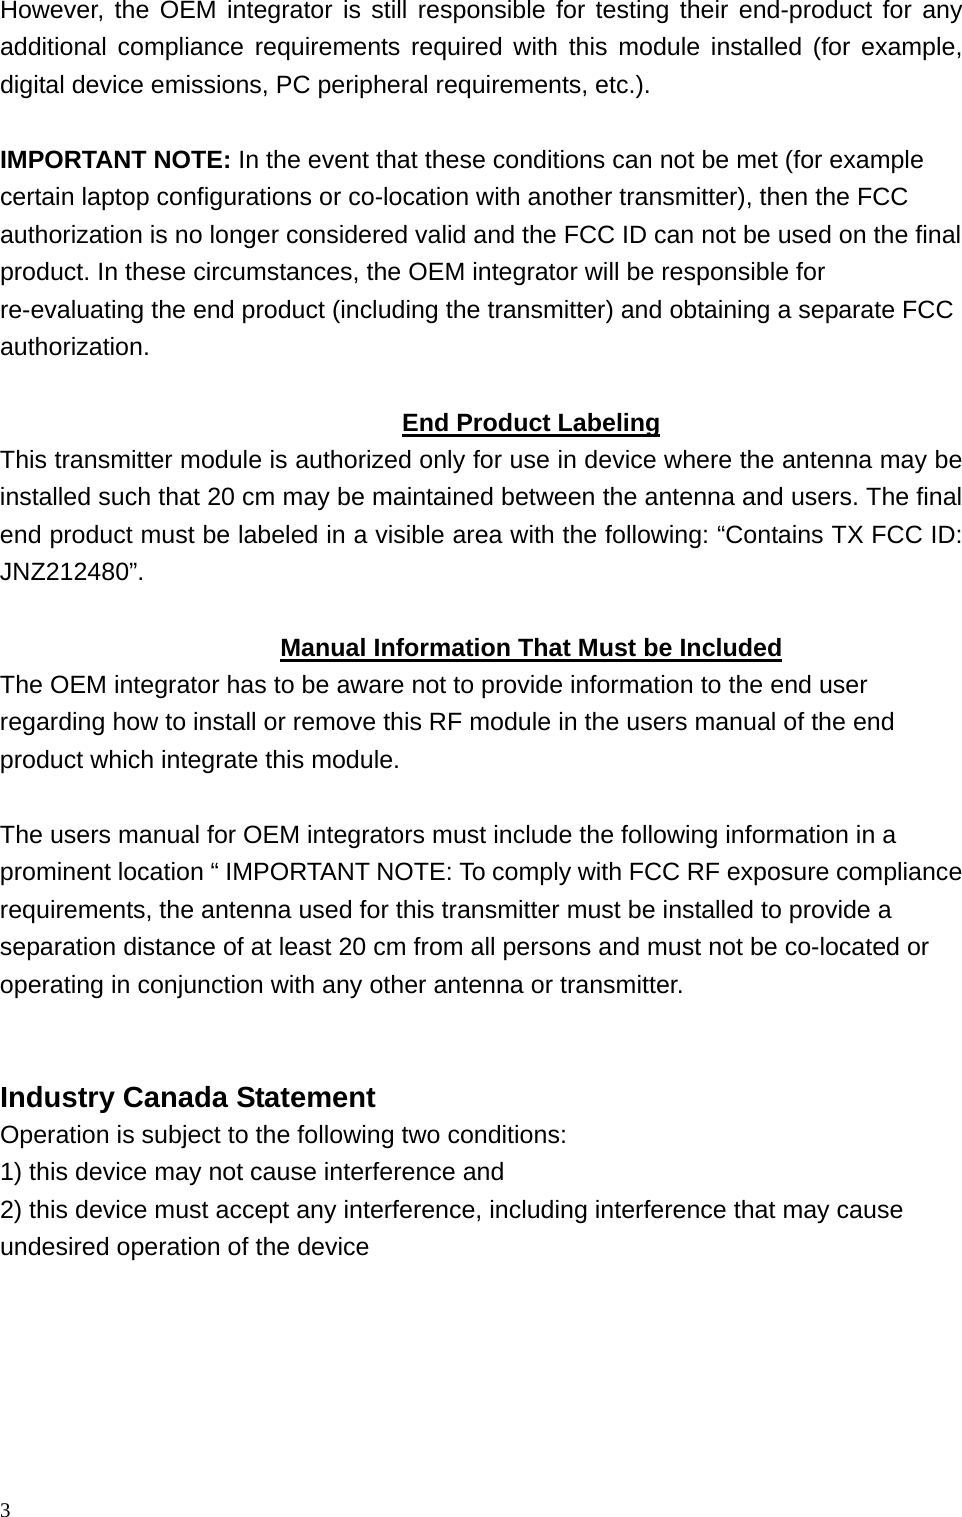 However, the OEM integrator is still responsible for testing their end-product for any additional compliance requirements required with this module installed (for example, digital device emissions, PC peripheral requirements, etc.).  IMPORTANT NOTE: In the event that these conditions can not be met (for example certain laptop configurations or co-location with another transmitter), then the FCC authorization is no longer considered valid and the FCC ID can not be used on the final product. In these circumstances, the OEM integrator will be responsible for re-evaluating the end product (including the transmitter) and obtaining a separate FCC authorization.  End Product Labeling This transmitter module is authorized only for use in device where the antenna may be installed such that 20 cm may be maintained between the antenna and users. The final end product must be labeled in a visible area with the following: “Contains TX FCC ID: JNZ212480”.  Manual Information That Must be Included The OEM integrator has to be aware not to provide information to the end user regarding how to install or remove this RF module in the users manual of the end product which integrate this module.  The users manual for OEM integrators must include the following information in a prominent location “ IMPORTANT NOTE: To comply with FCC RF exposure compliance requirements, the antenna used for this transmitter must be installed to provide a separation distance of at least 20 cm from all persons and must not be co-located or operating in conjunction with any other antenna or transmitter.   Industry Canada Statement Operation is subject to the following two conditions: 1) this device may not cause interference and 2) this device must accept any interference, including interference that may cause undesired operation of the device 3 